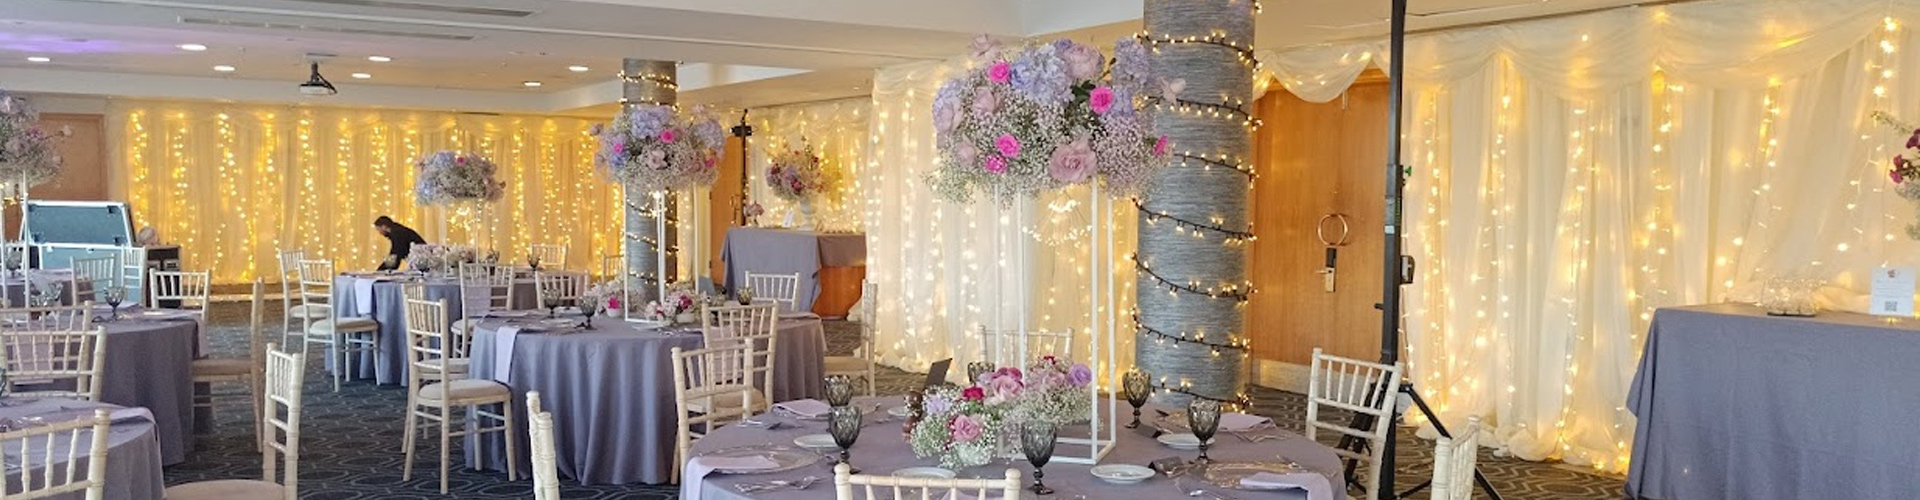 Fairy Light Backdrops - Rental and Hire South and Mid Wales